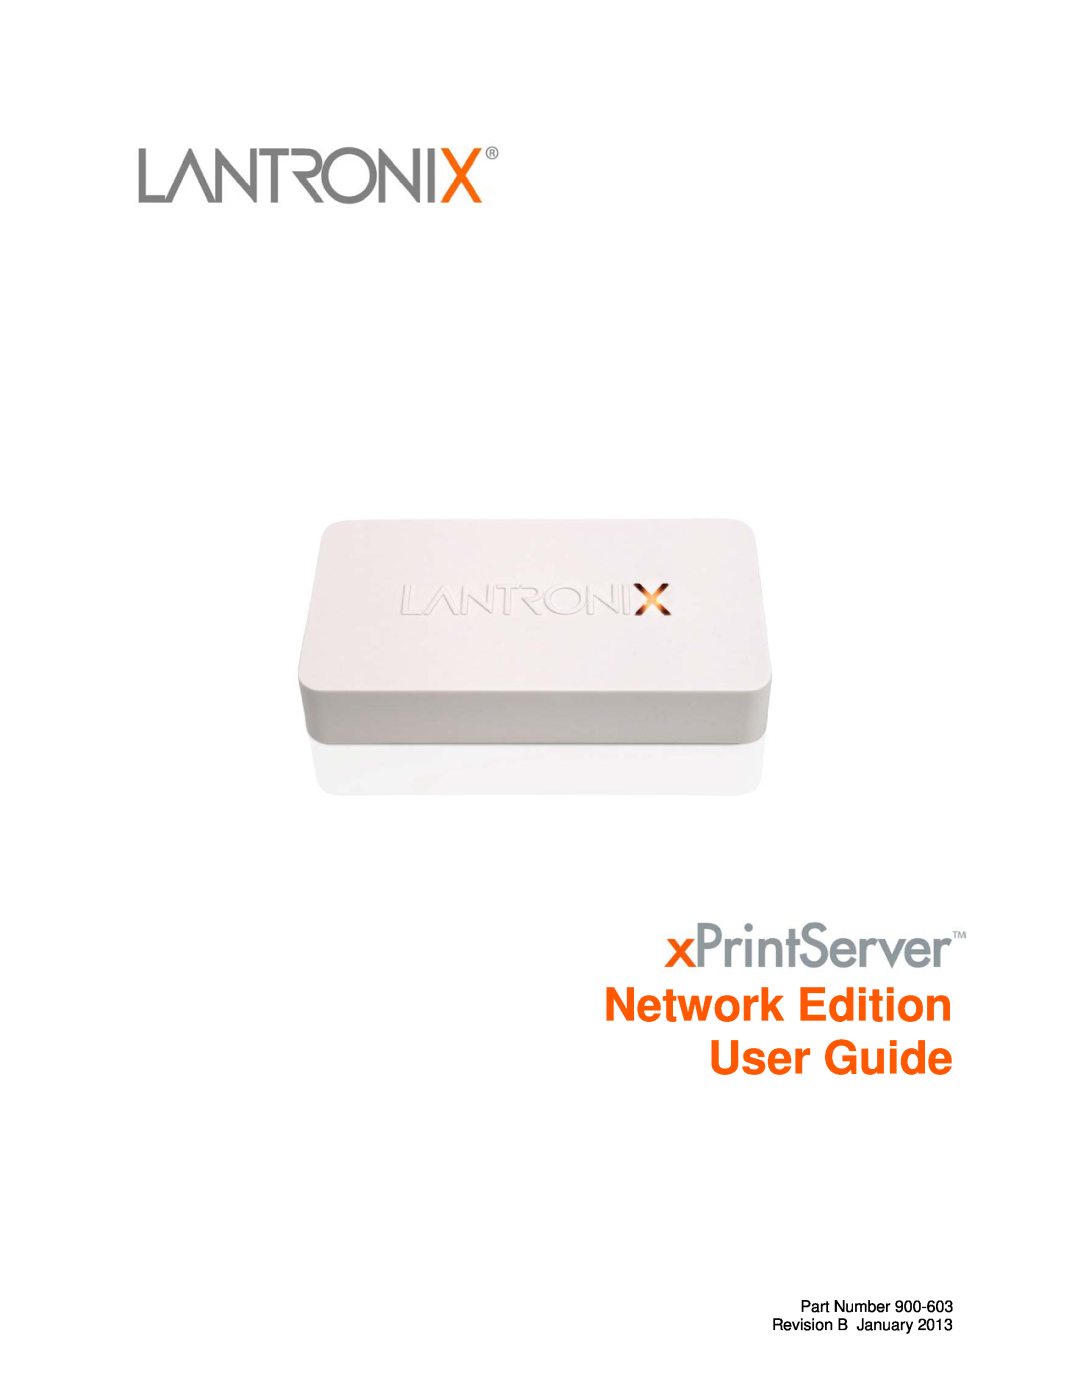 Lantronix 900-603 manual Network Edition User Guide, Part Number Revision B January 